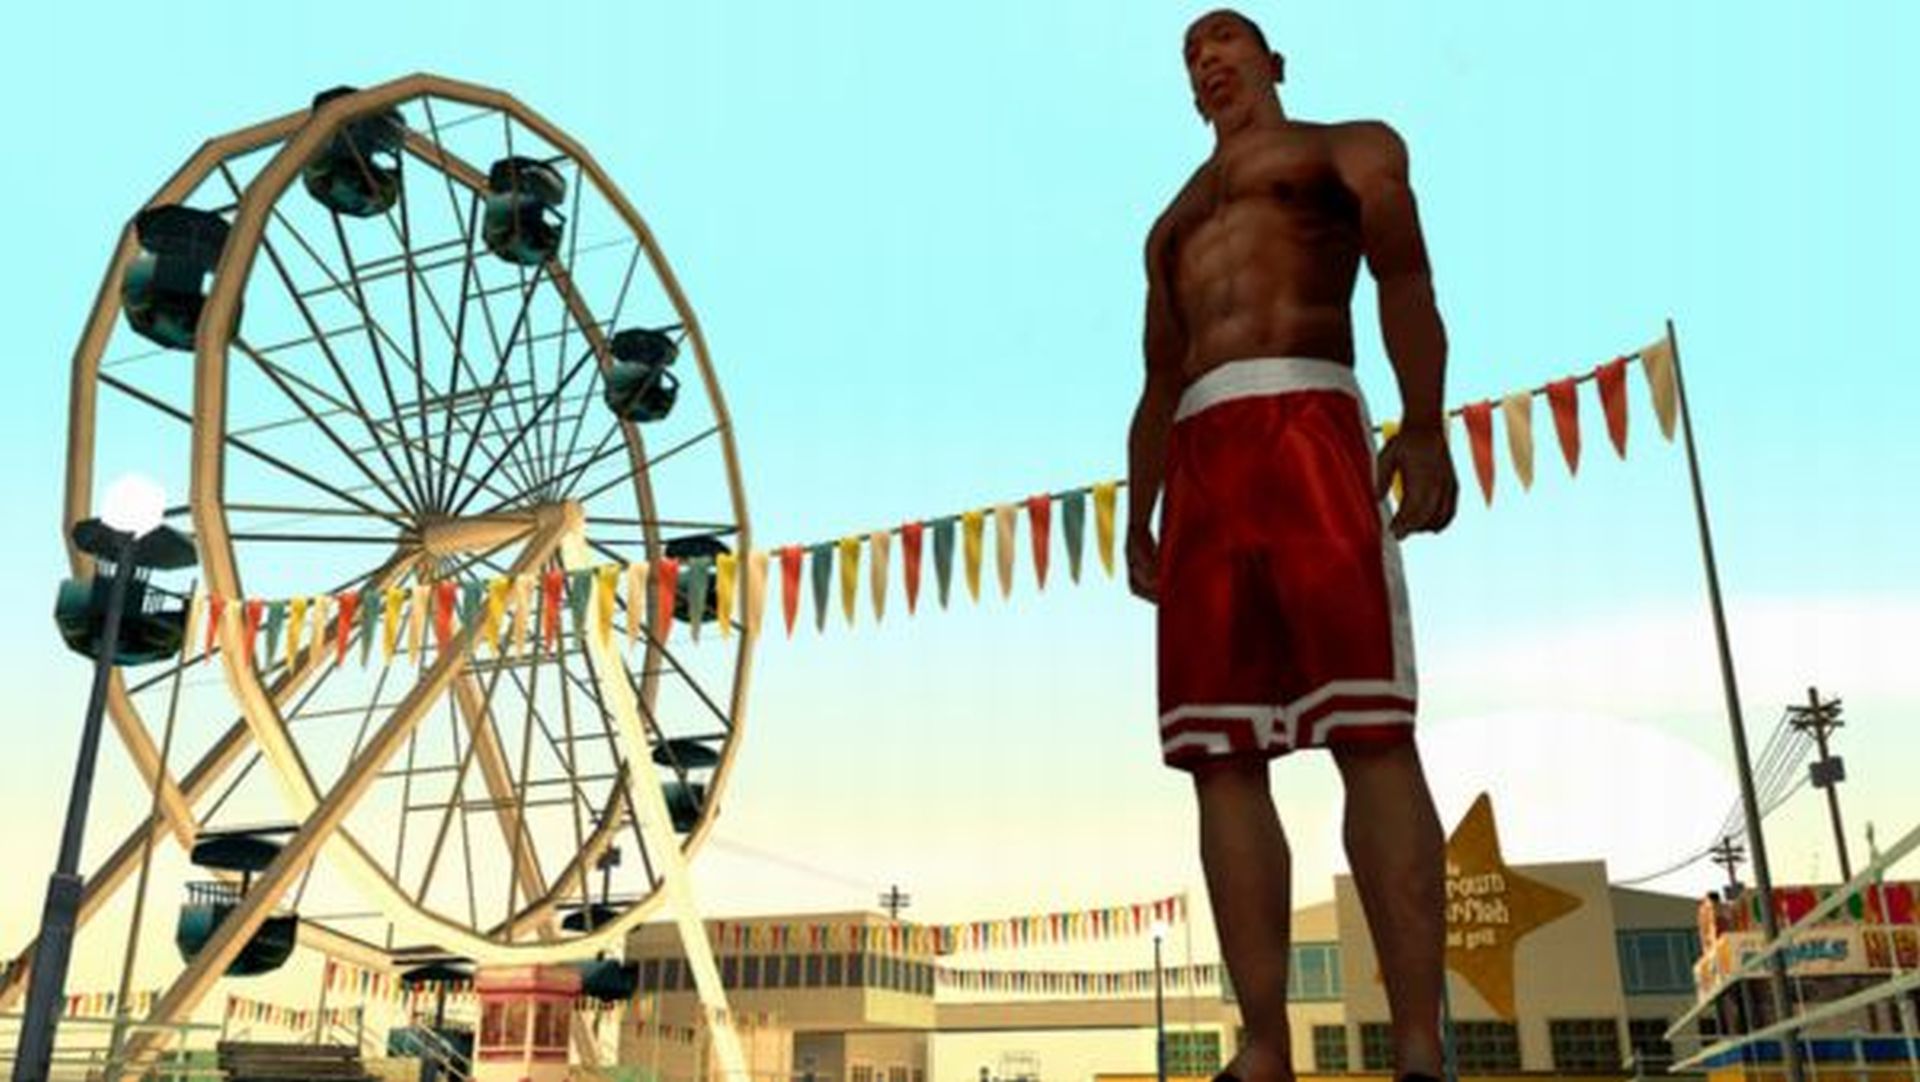 Grand Theft Auto: San Andreas VR' coming to Oculus Quest 2